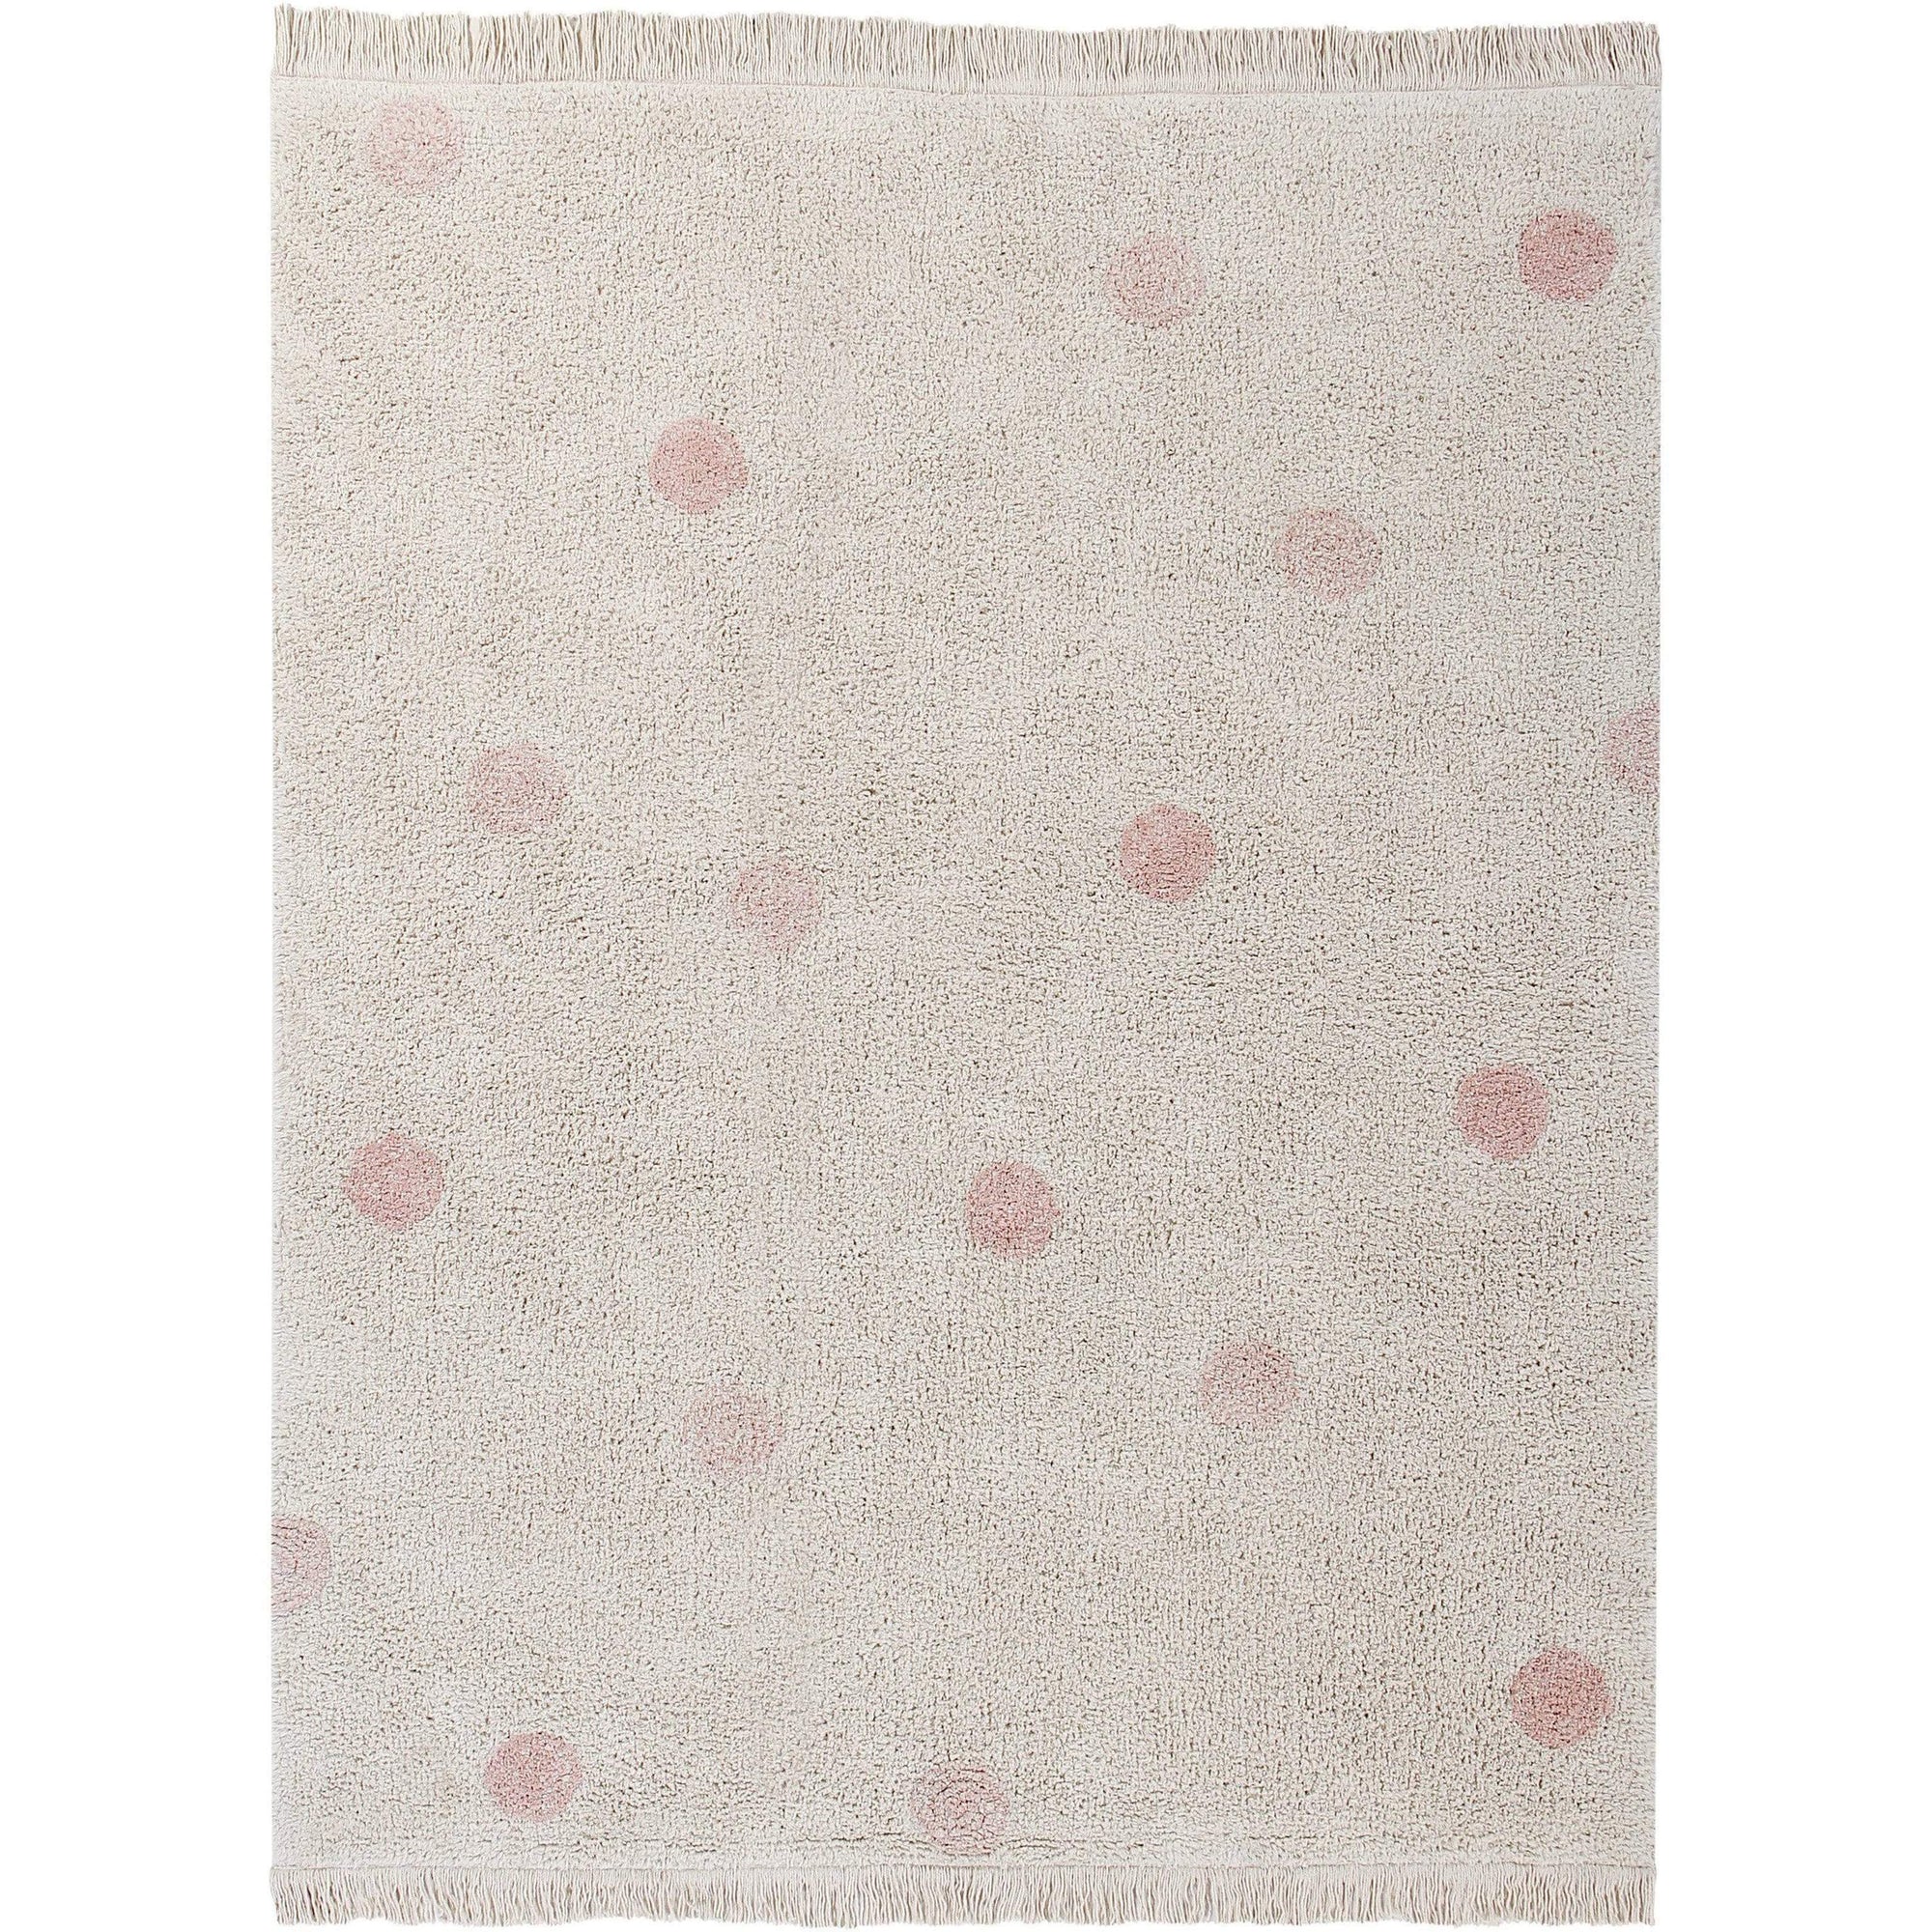 Lorena Canals Hippy Dots Natural Vintage Nude Washable Area Rug